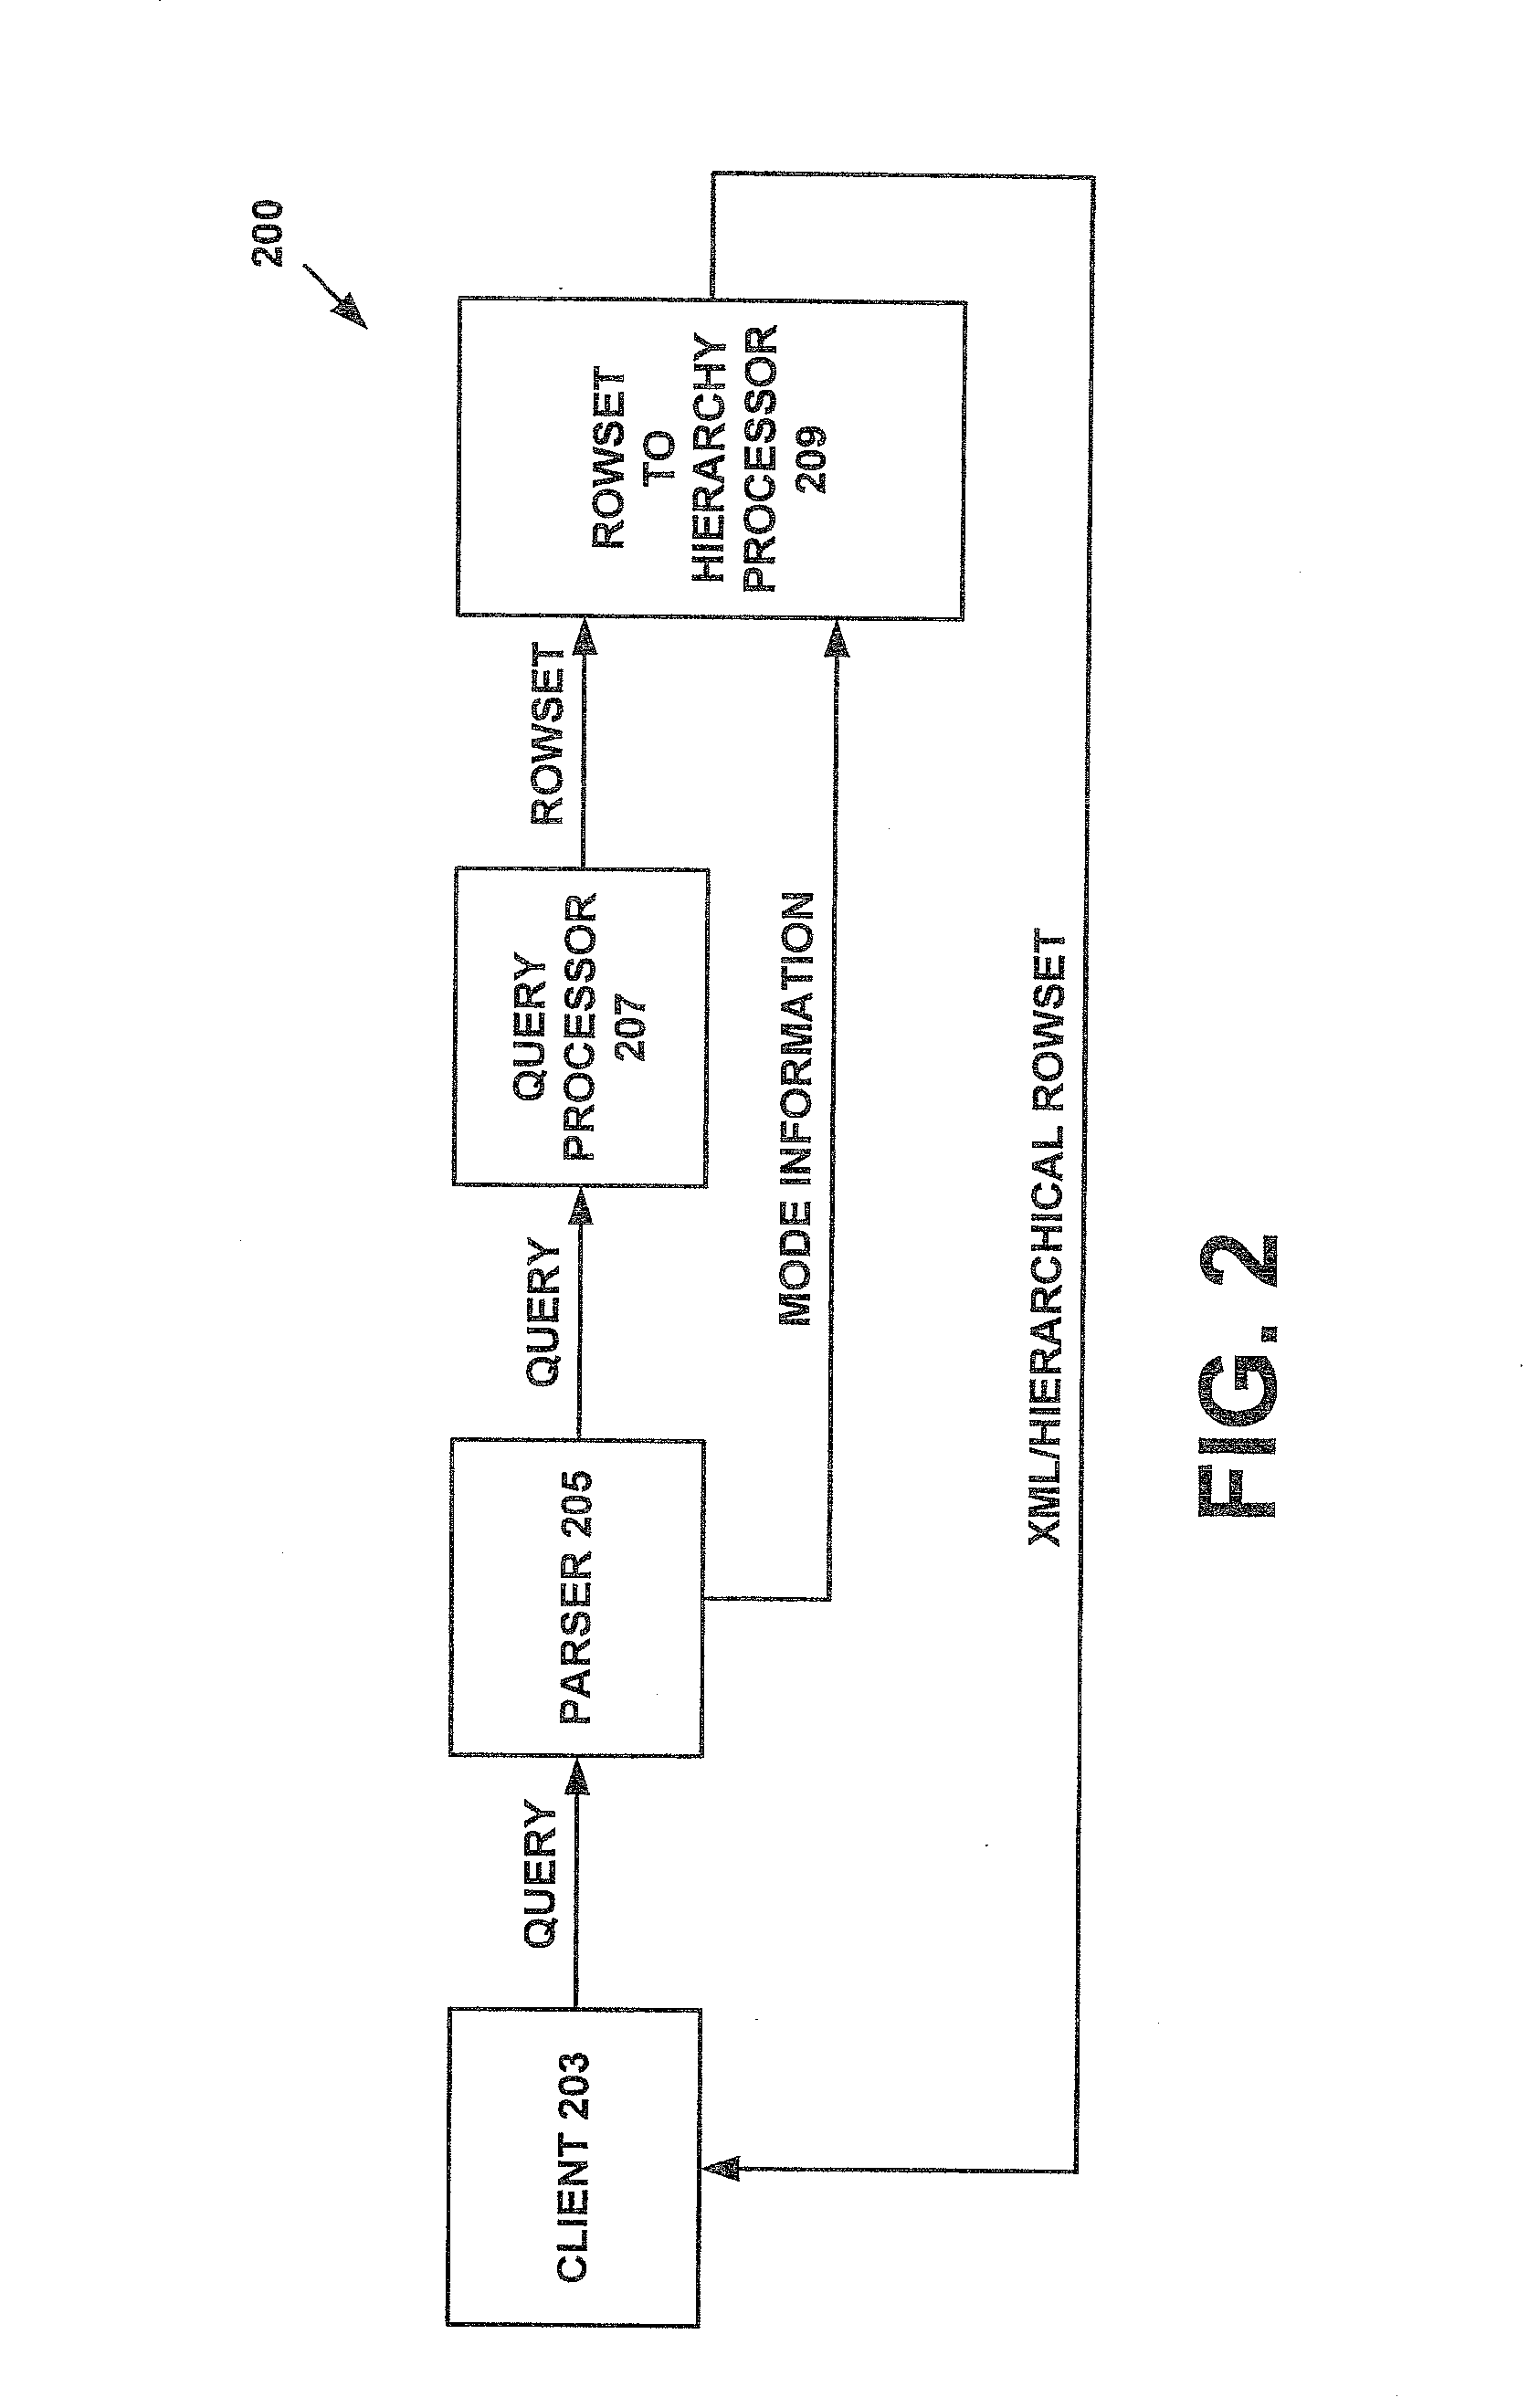 Systems and methods for transforming query results into hierarchical information